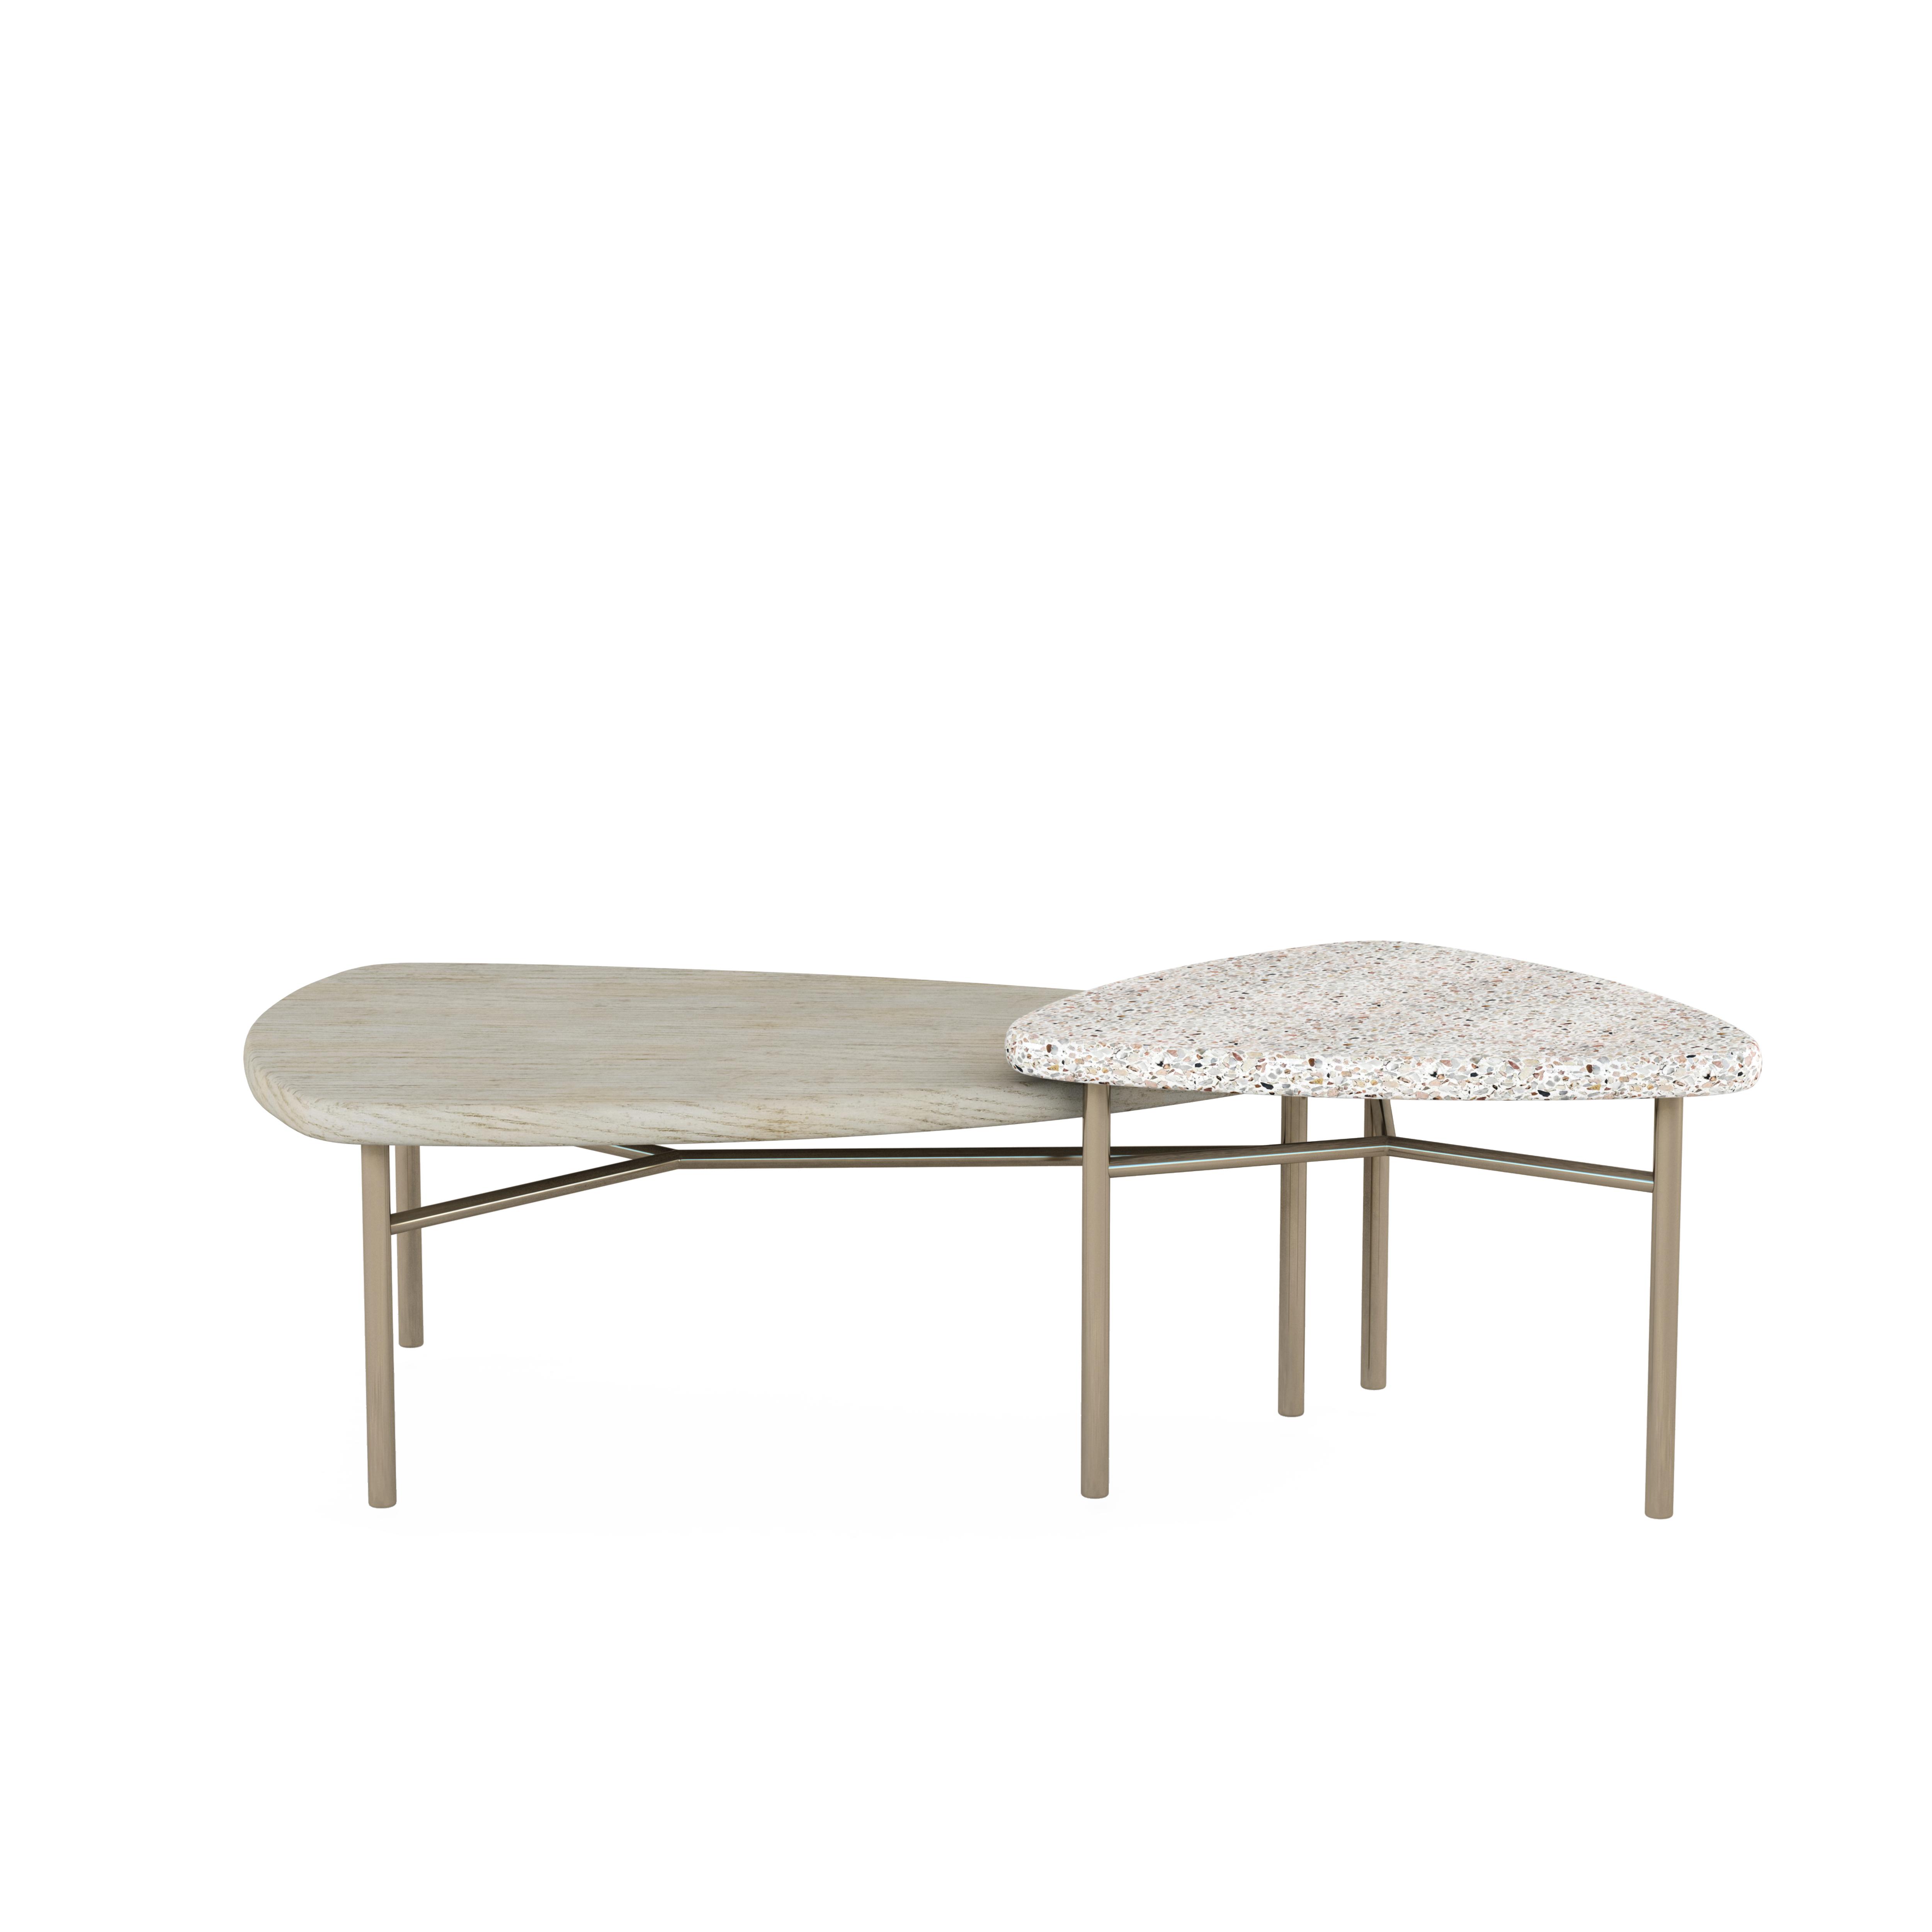 Contemporary Coffee Table Cotiere 299362-1243 in Beige 